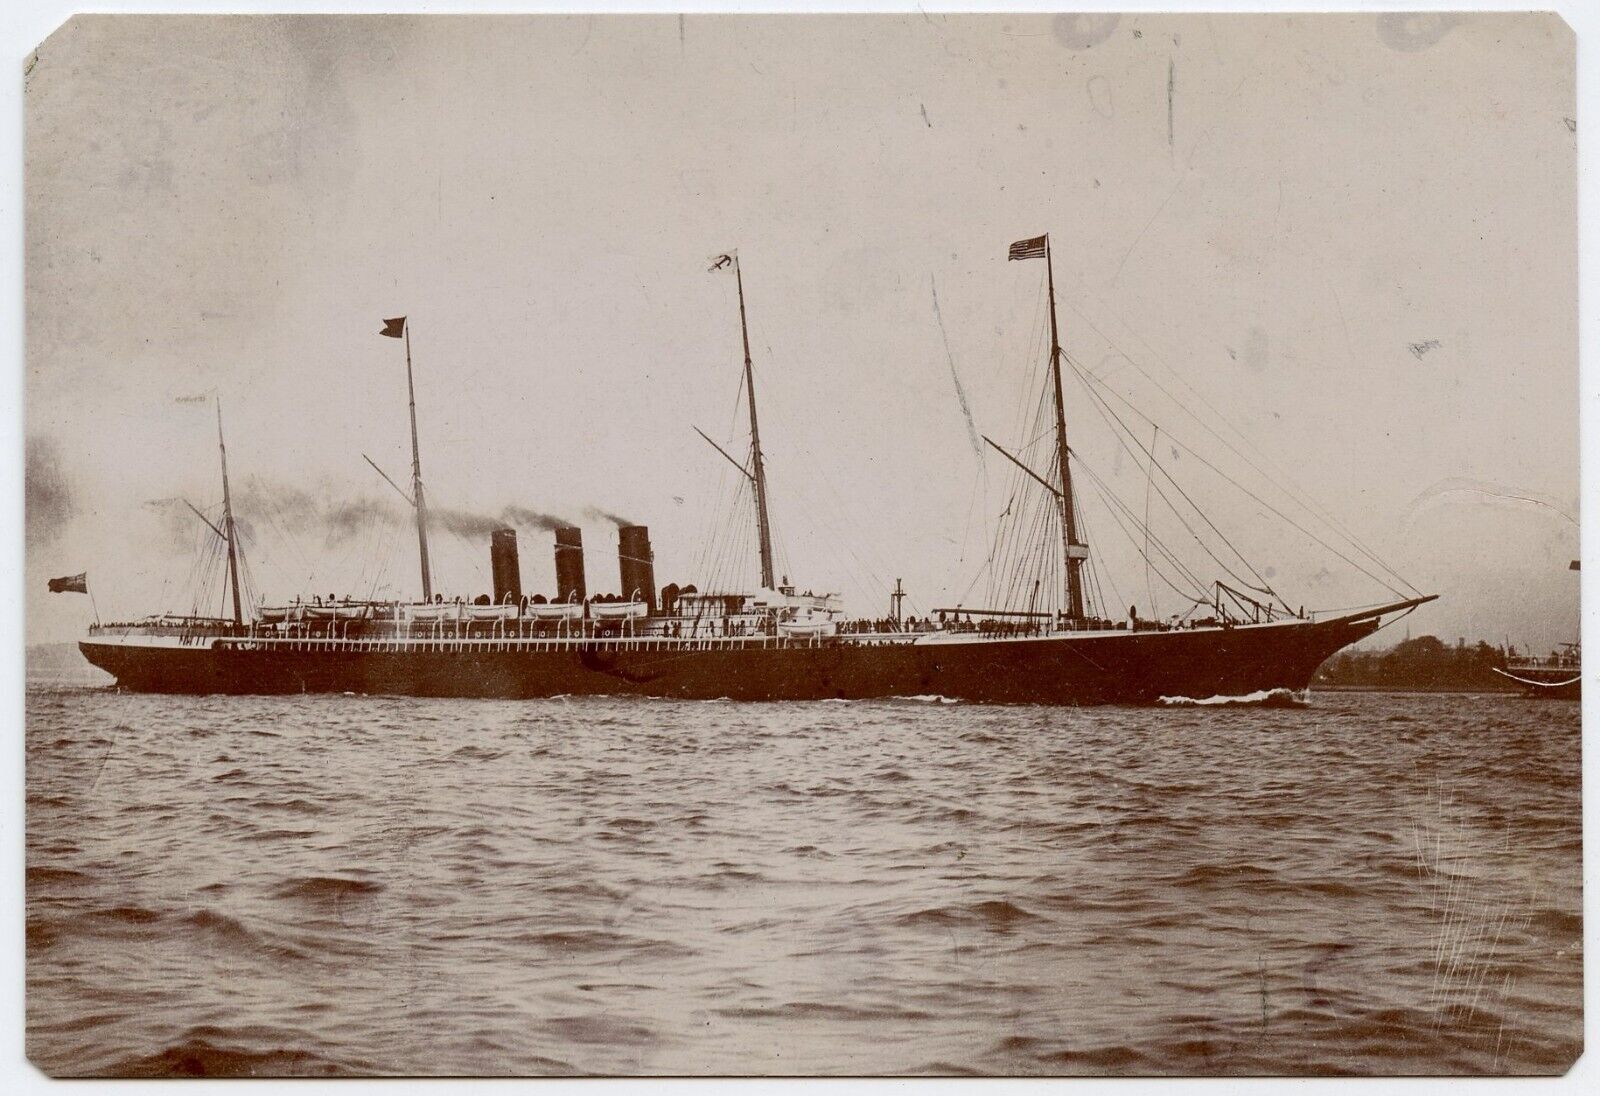 Inman Line S.S. City of Rome ? Ship Vintage Photo